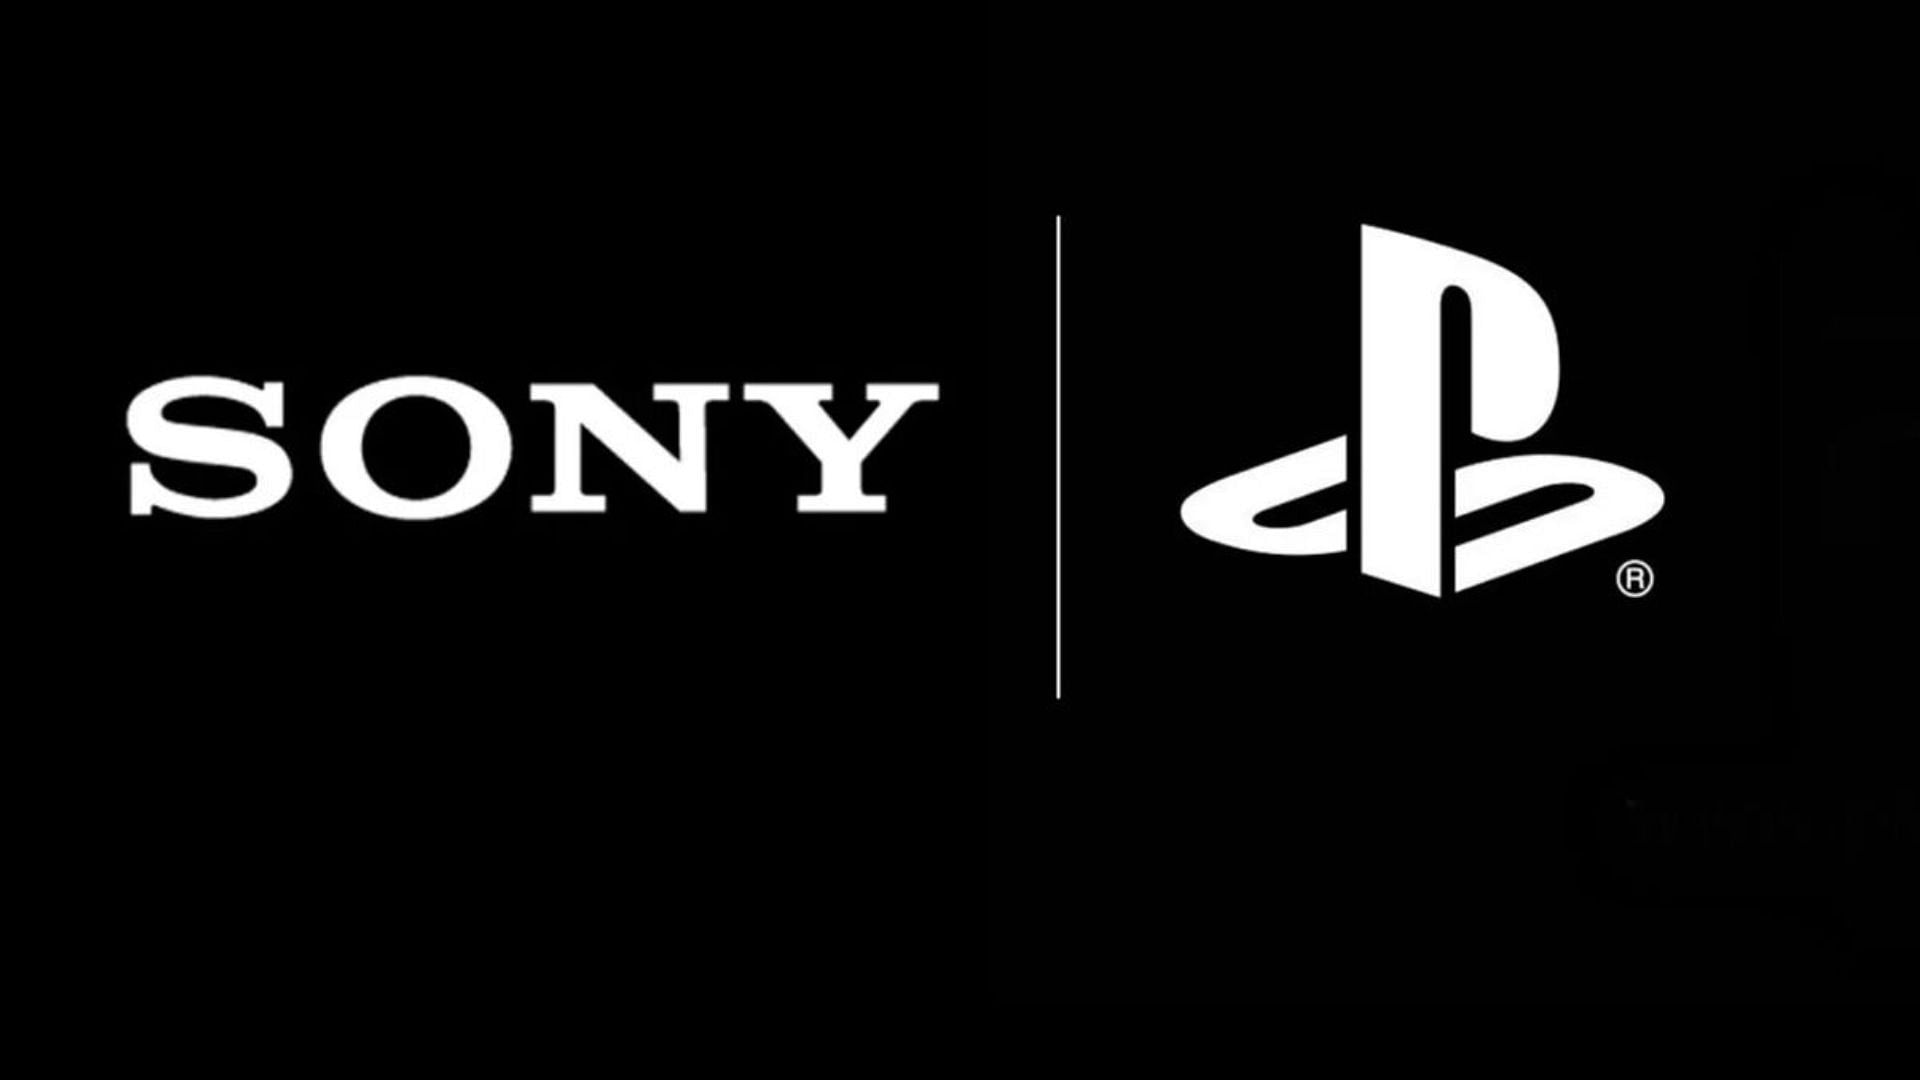 Sony and PlayStation confirmed the recent data breach, stating roughly 6800 internal employees are affected (Image via PlayStation, Sony)